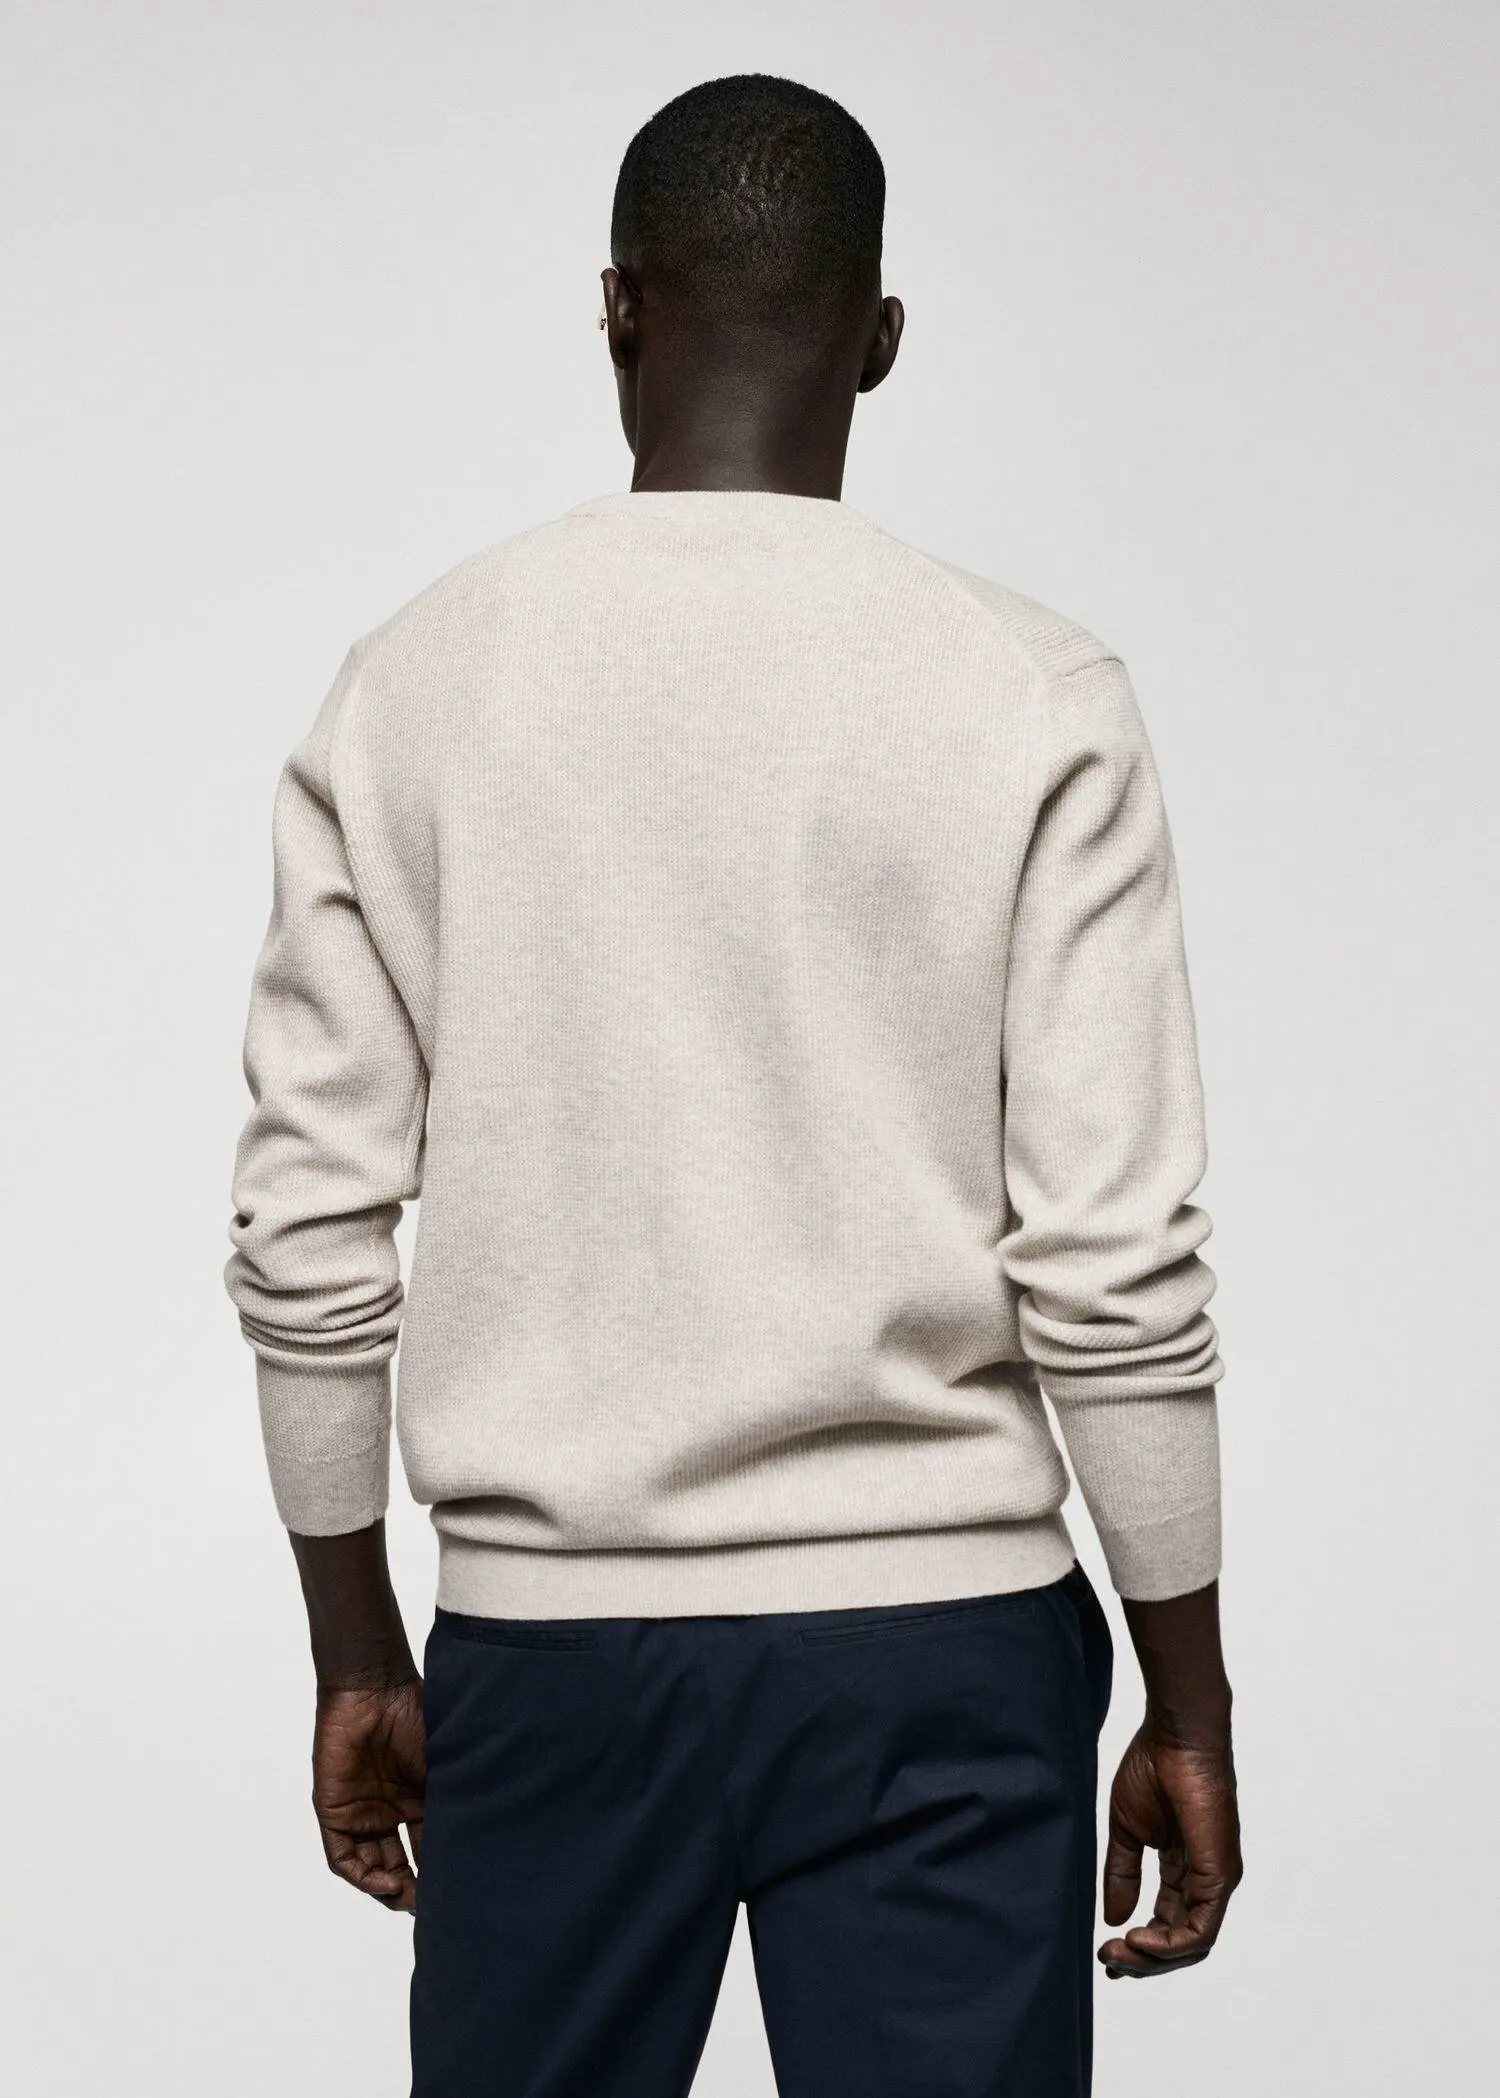 Mango Structured cotton sweater. a man wearing a white sweater standing in front of a white wall. 